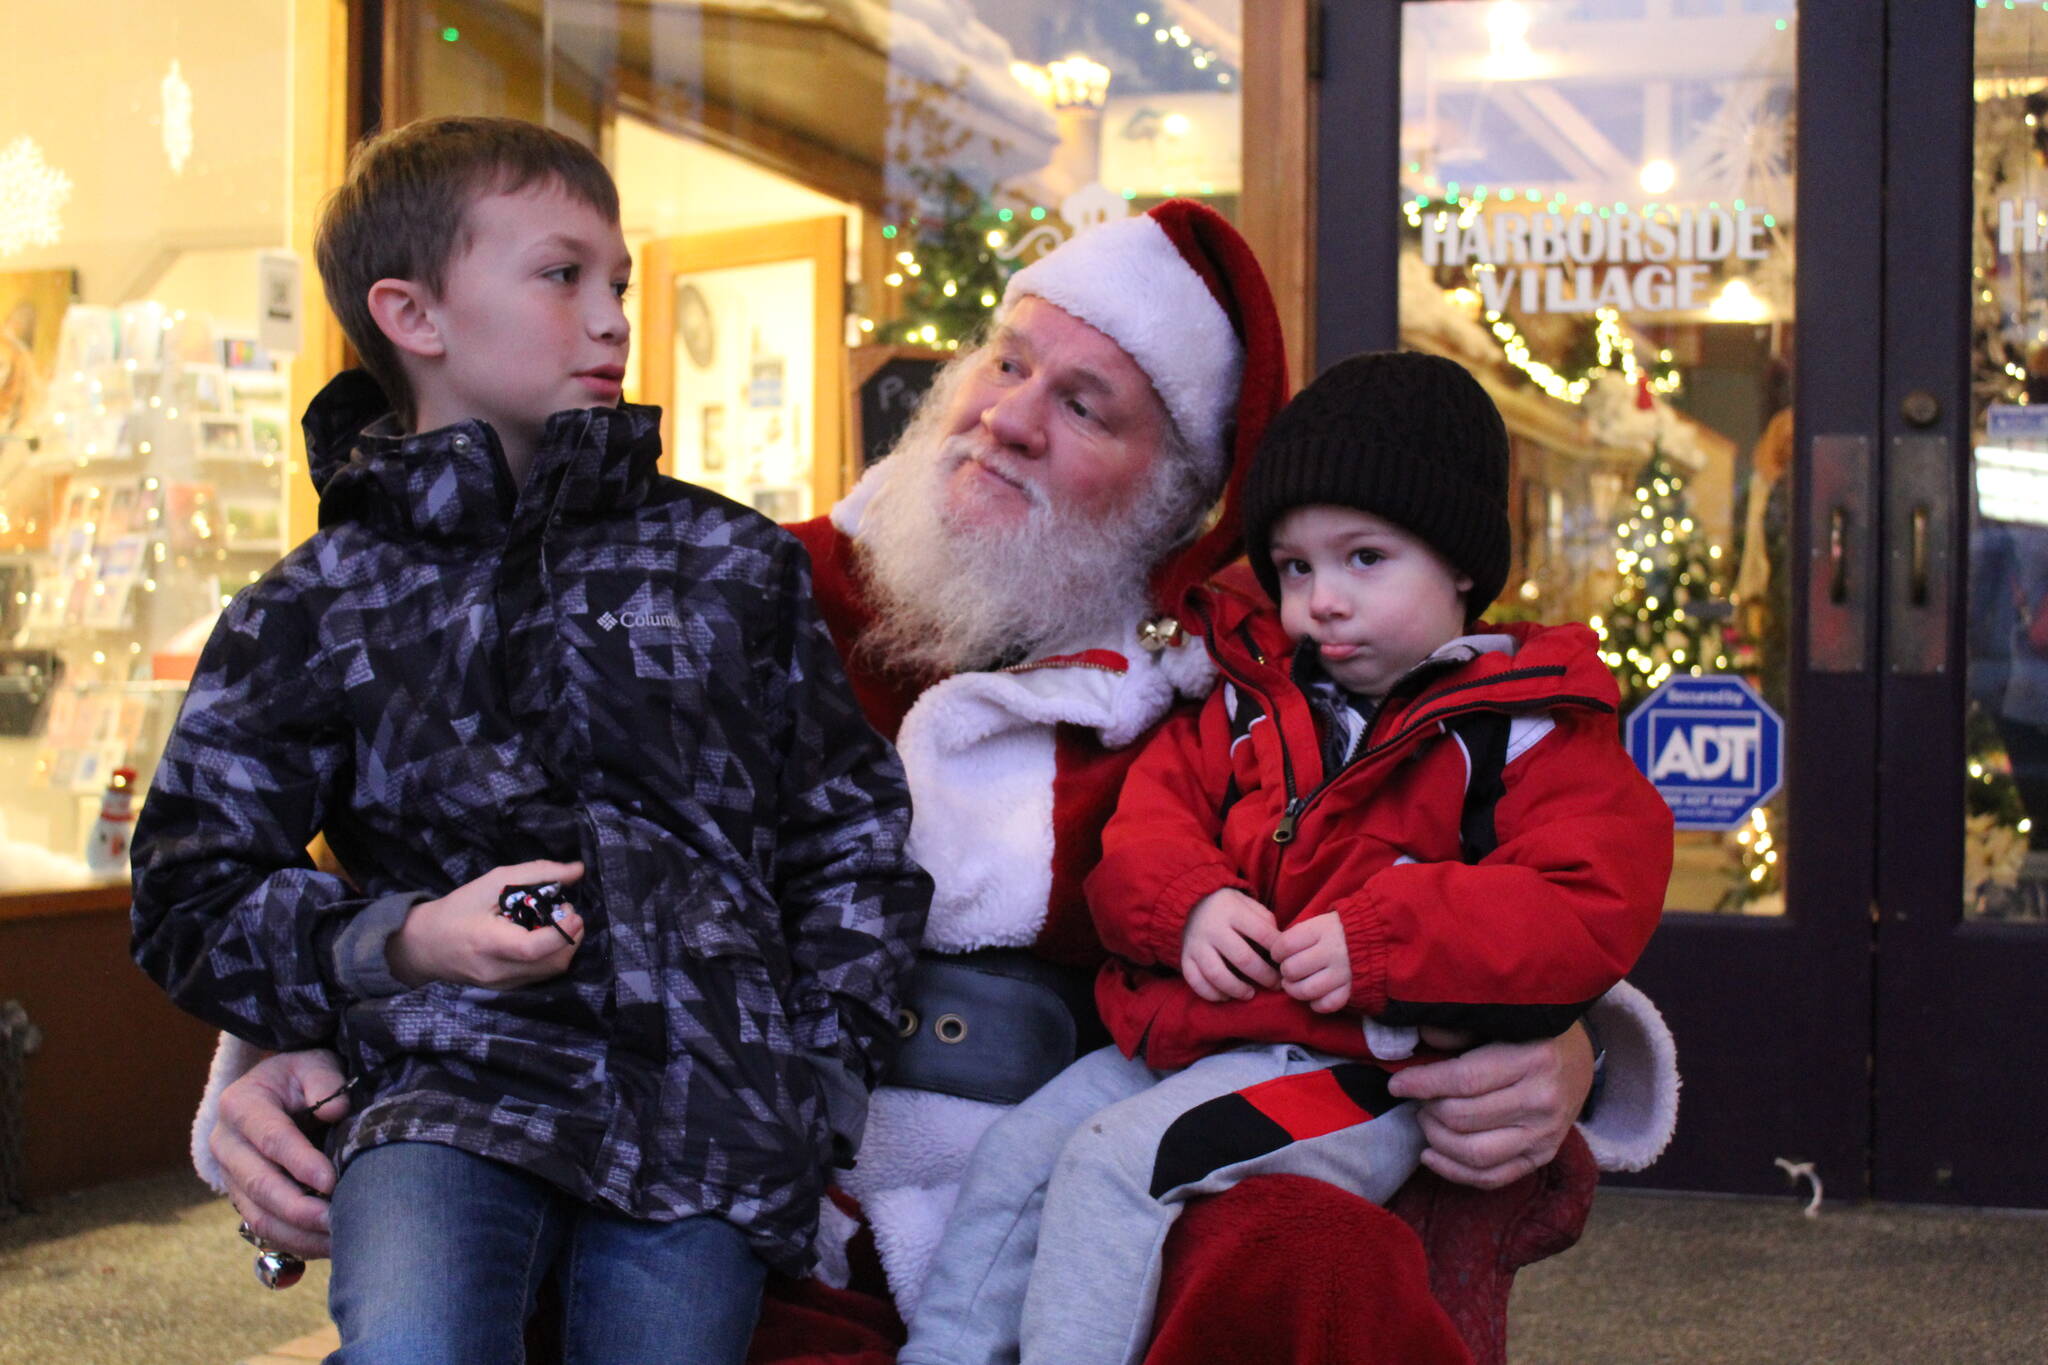 Photo by Karina Andrew/Whidbey News-Times
August Stohmire, 2, and his young uncle Ryan Brown, 9, meet Santa Claus Dec. 4. on Pioneer Way.